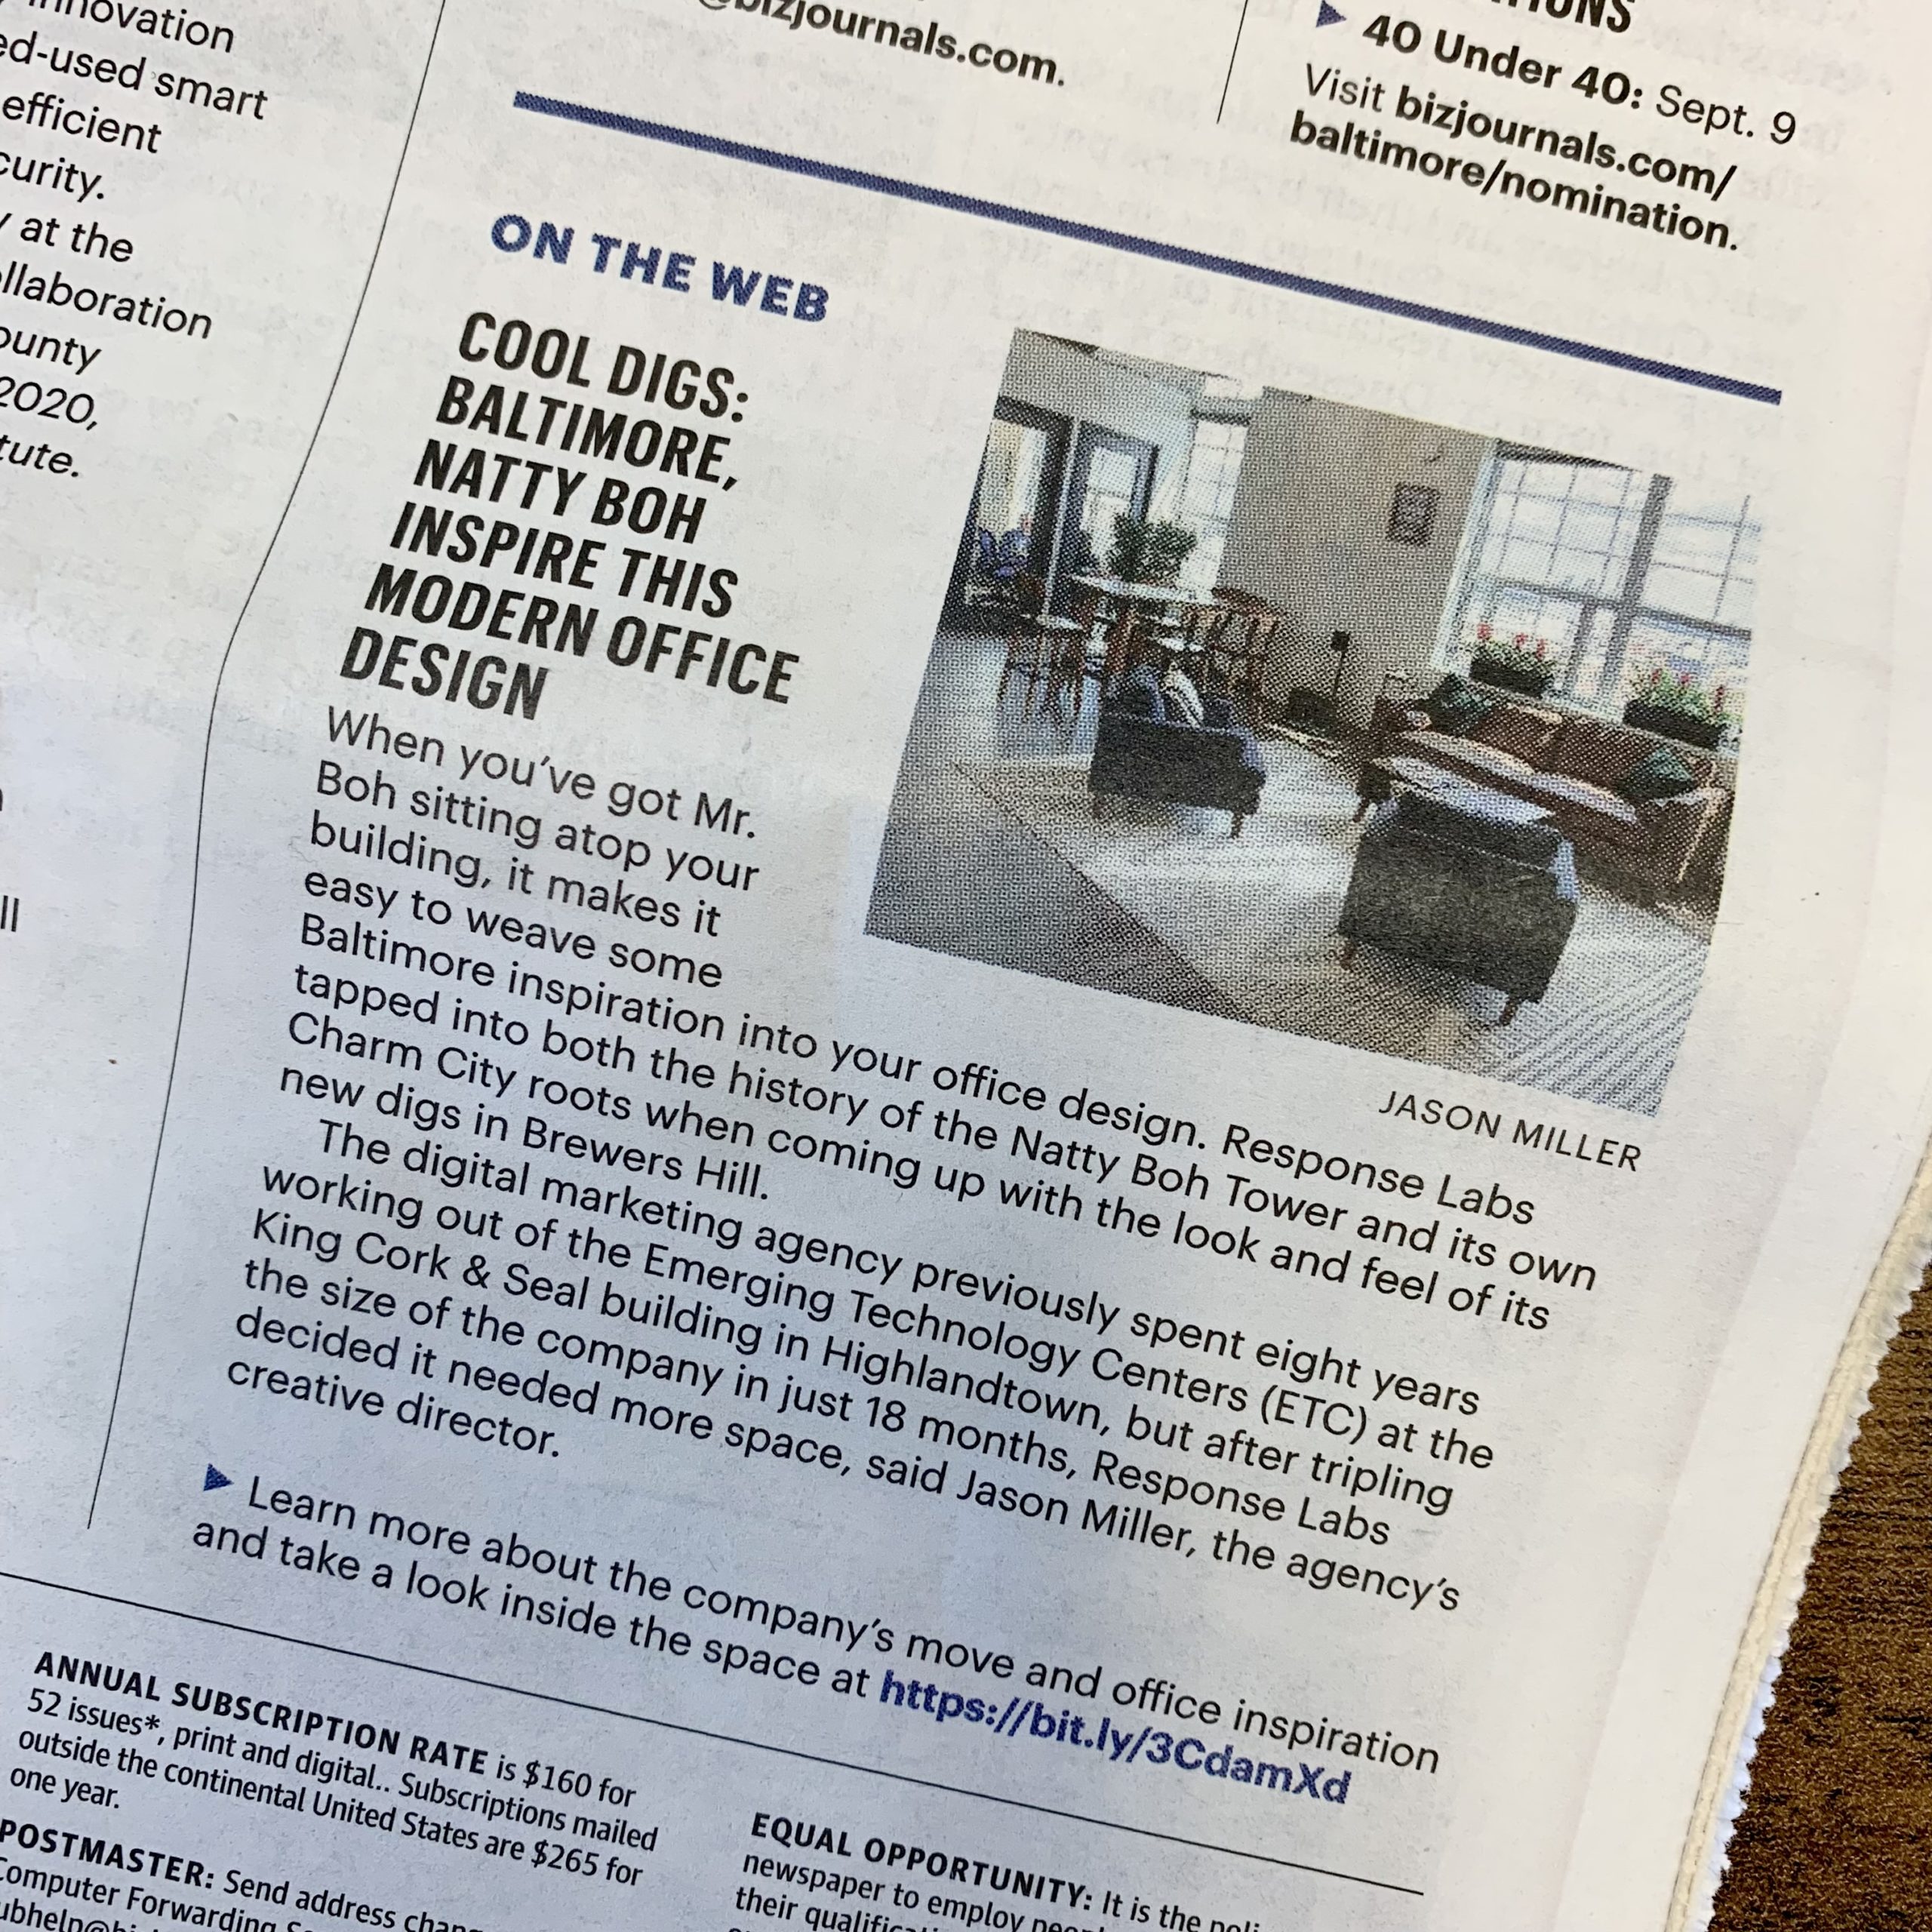 Baltimore Business Journal "Cool Digs" Feature of Response Labs Baltimore Headquarters